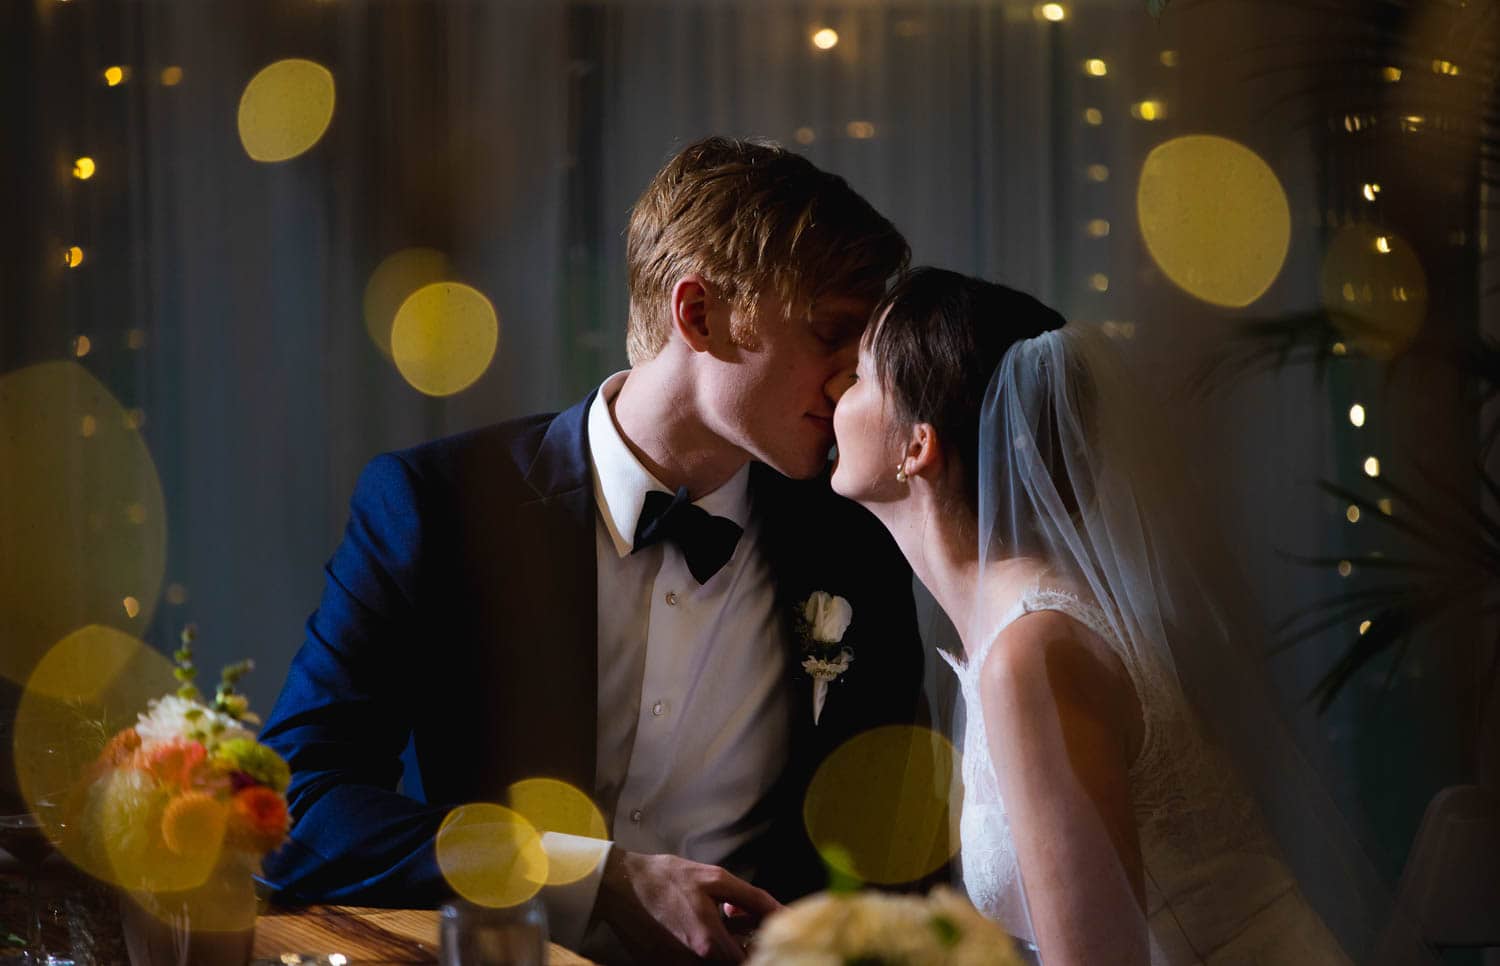 With twinkly lights around them, the bride and groom share a kiss with dramatic lightning during their reception.